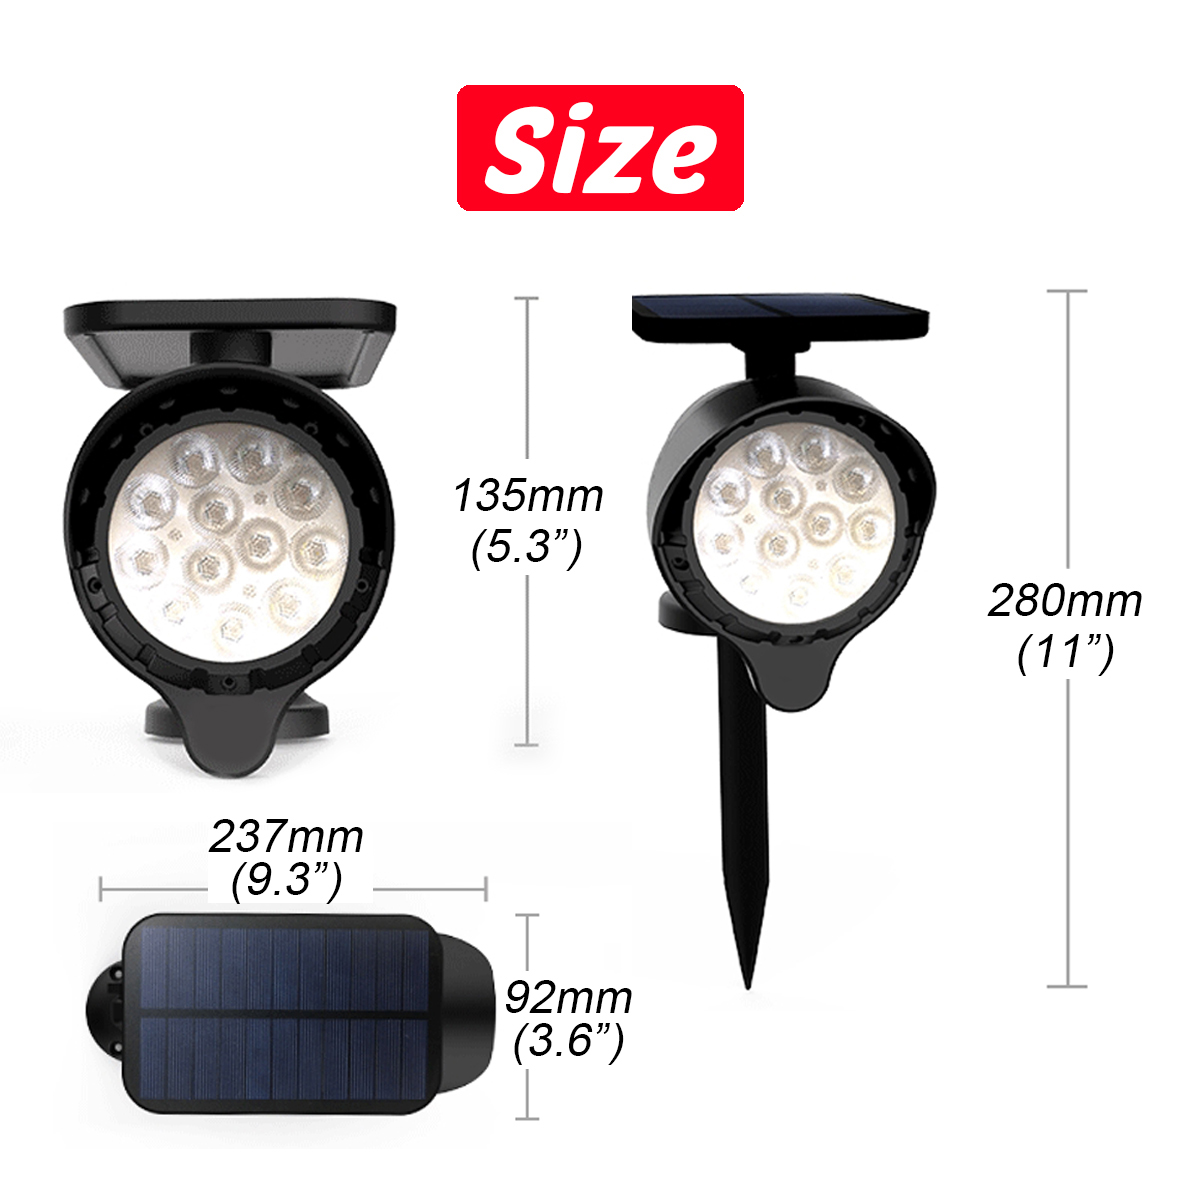 Waterproof-LED-Solar-Lawn-Light-ColorfulWarm-WhiteWhite-Outdoor-Wall-Ground-Garden-Pathway-Security--1724544-10